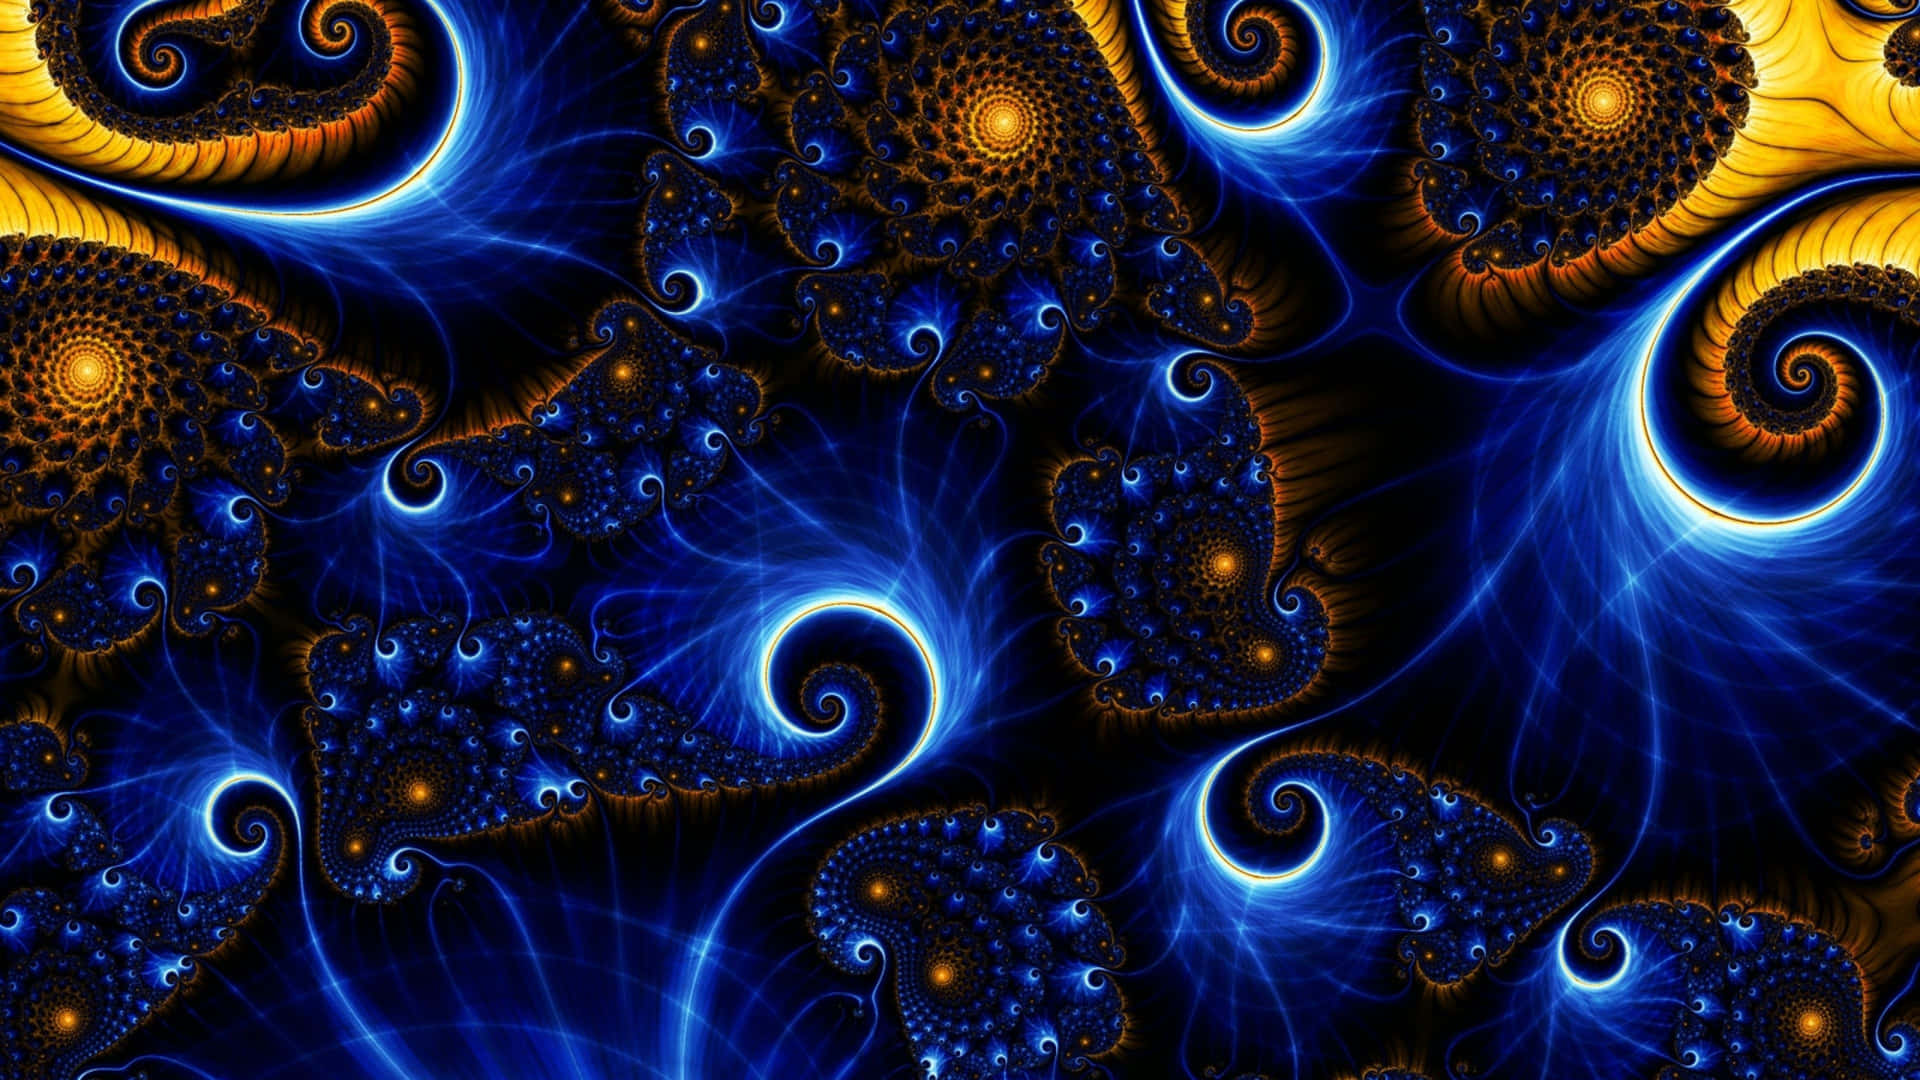 A Blue And Yellow Fractal Design On A Black Background Wallpaper